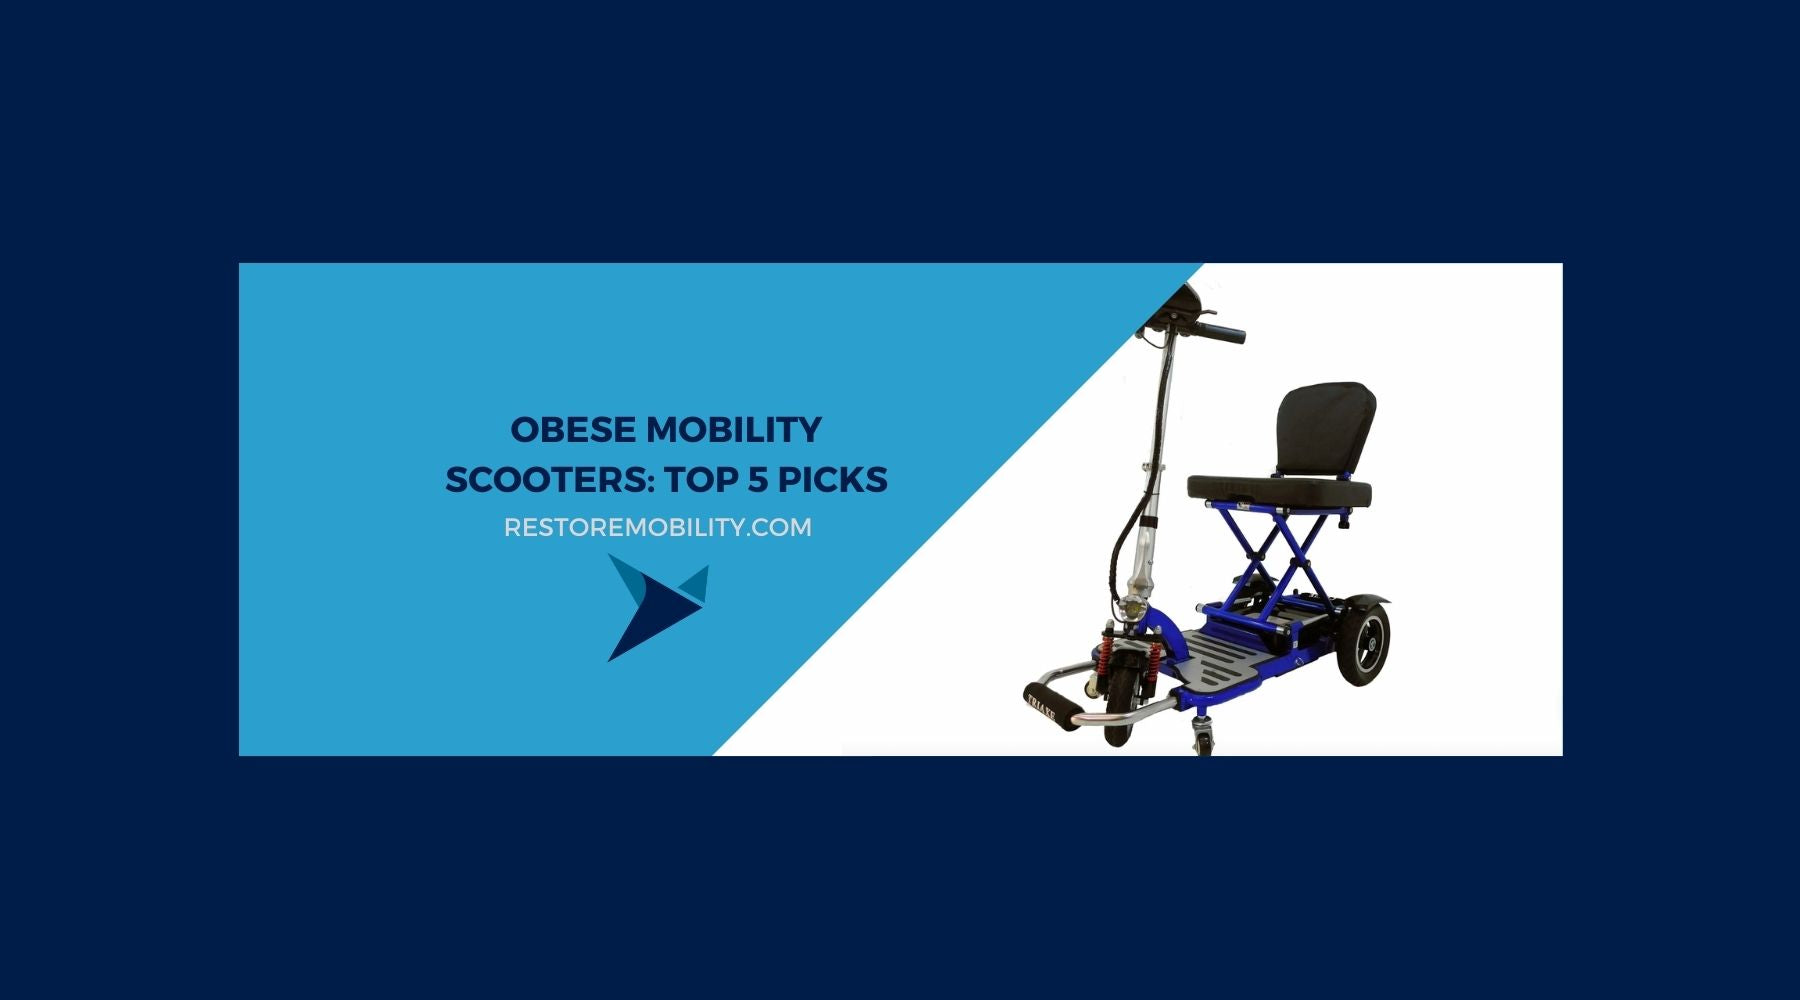 Obese Mobility Scooter: Top 5 Picks